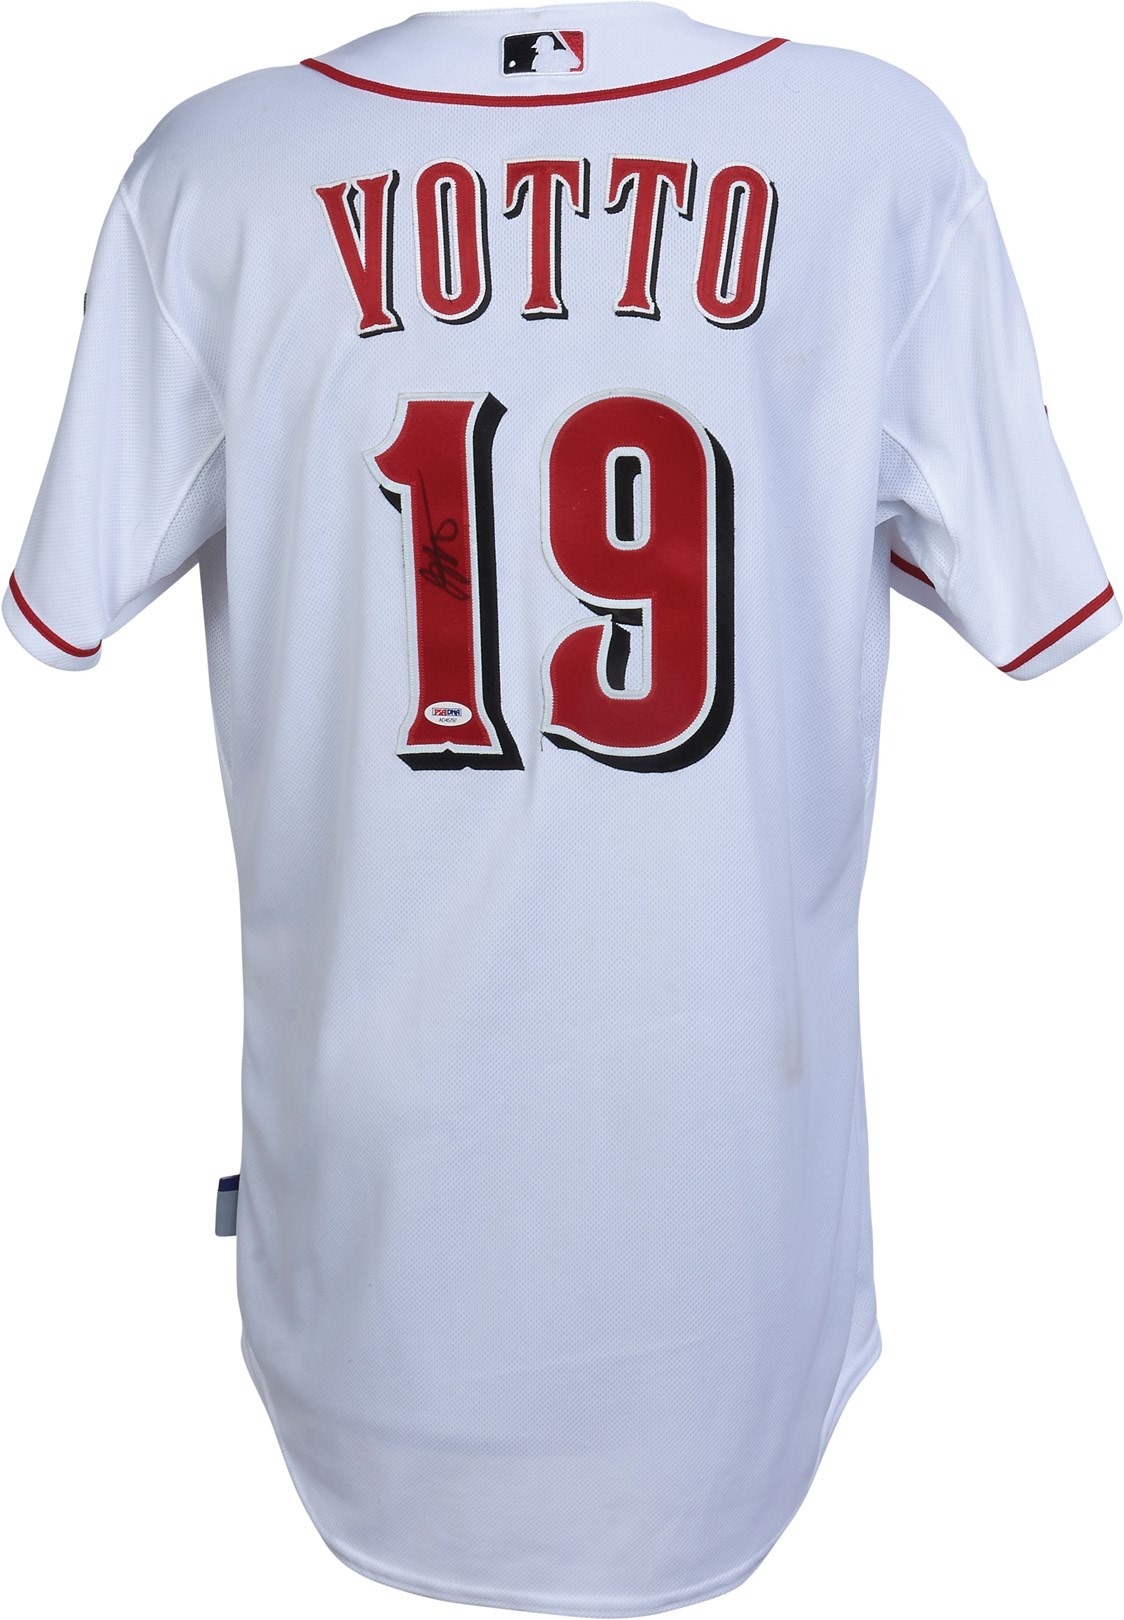 8/24/15 Joey Votto Signed Game Worn Home Run Jersey (PSA, MLB Auth. & Photo-Matched)